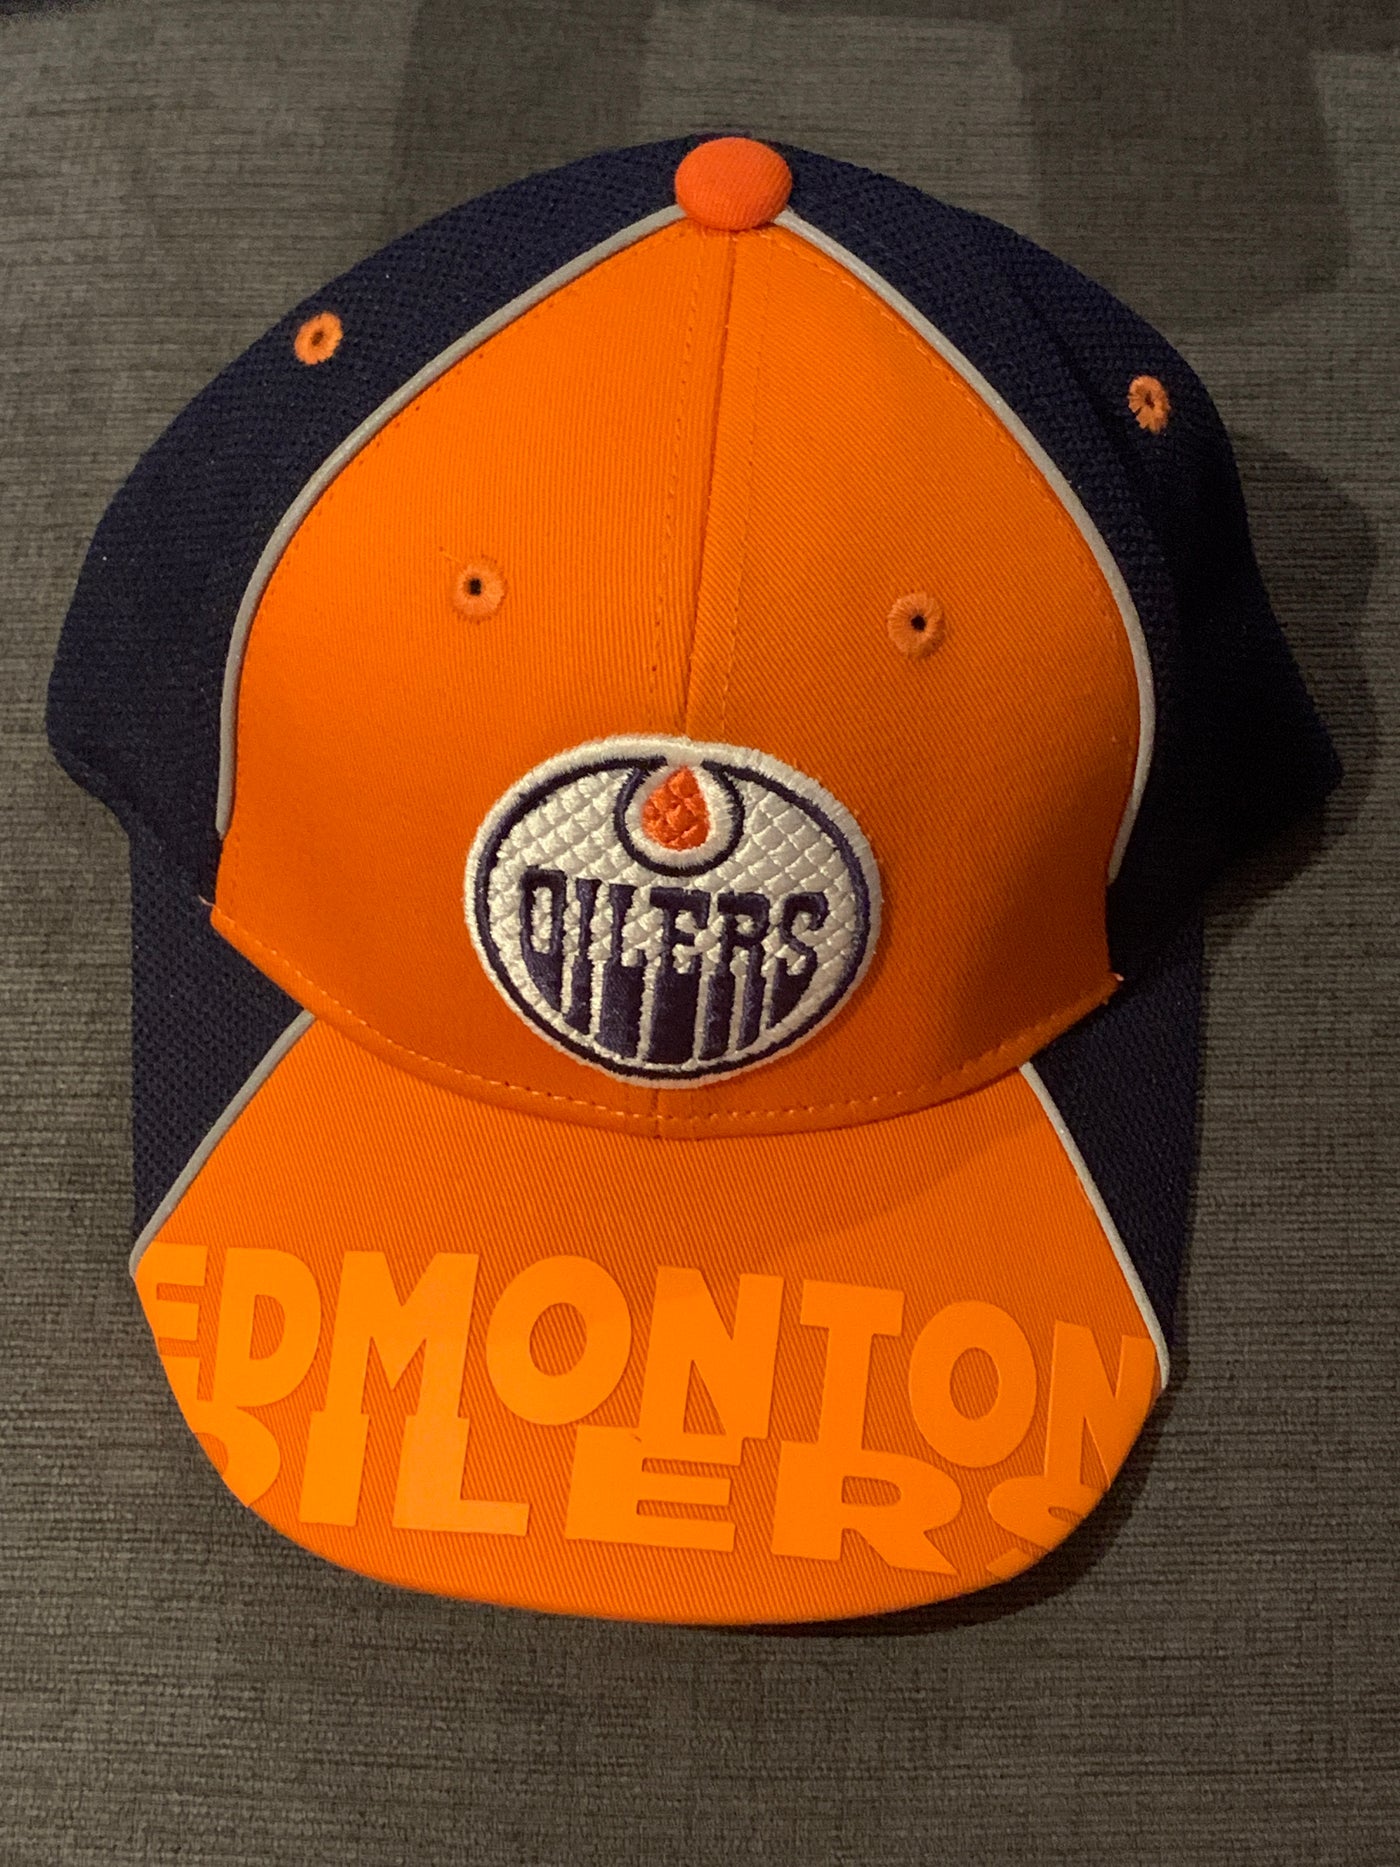 Connor McDavid #97 - 2020-21 Edmonton Oilers vs. Vancouver Canucks  Game-Worn Reverse Retro Jersey (Set #3 - February 25, 2021 -  PHOTO-MATCHED!) - NHL Auctions